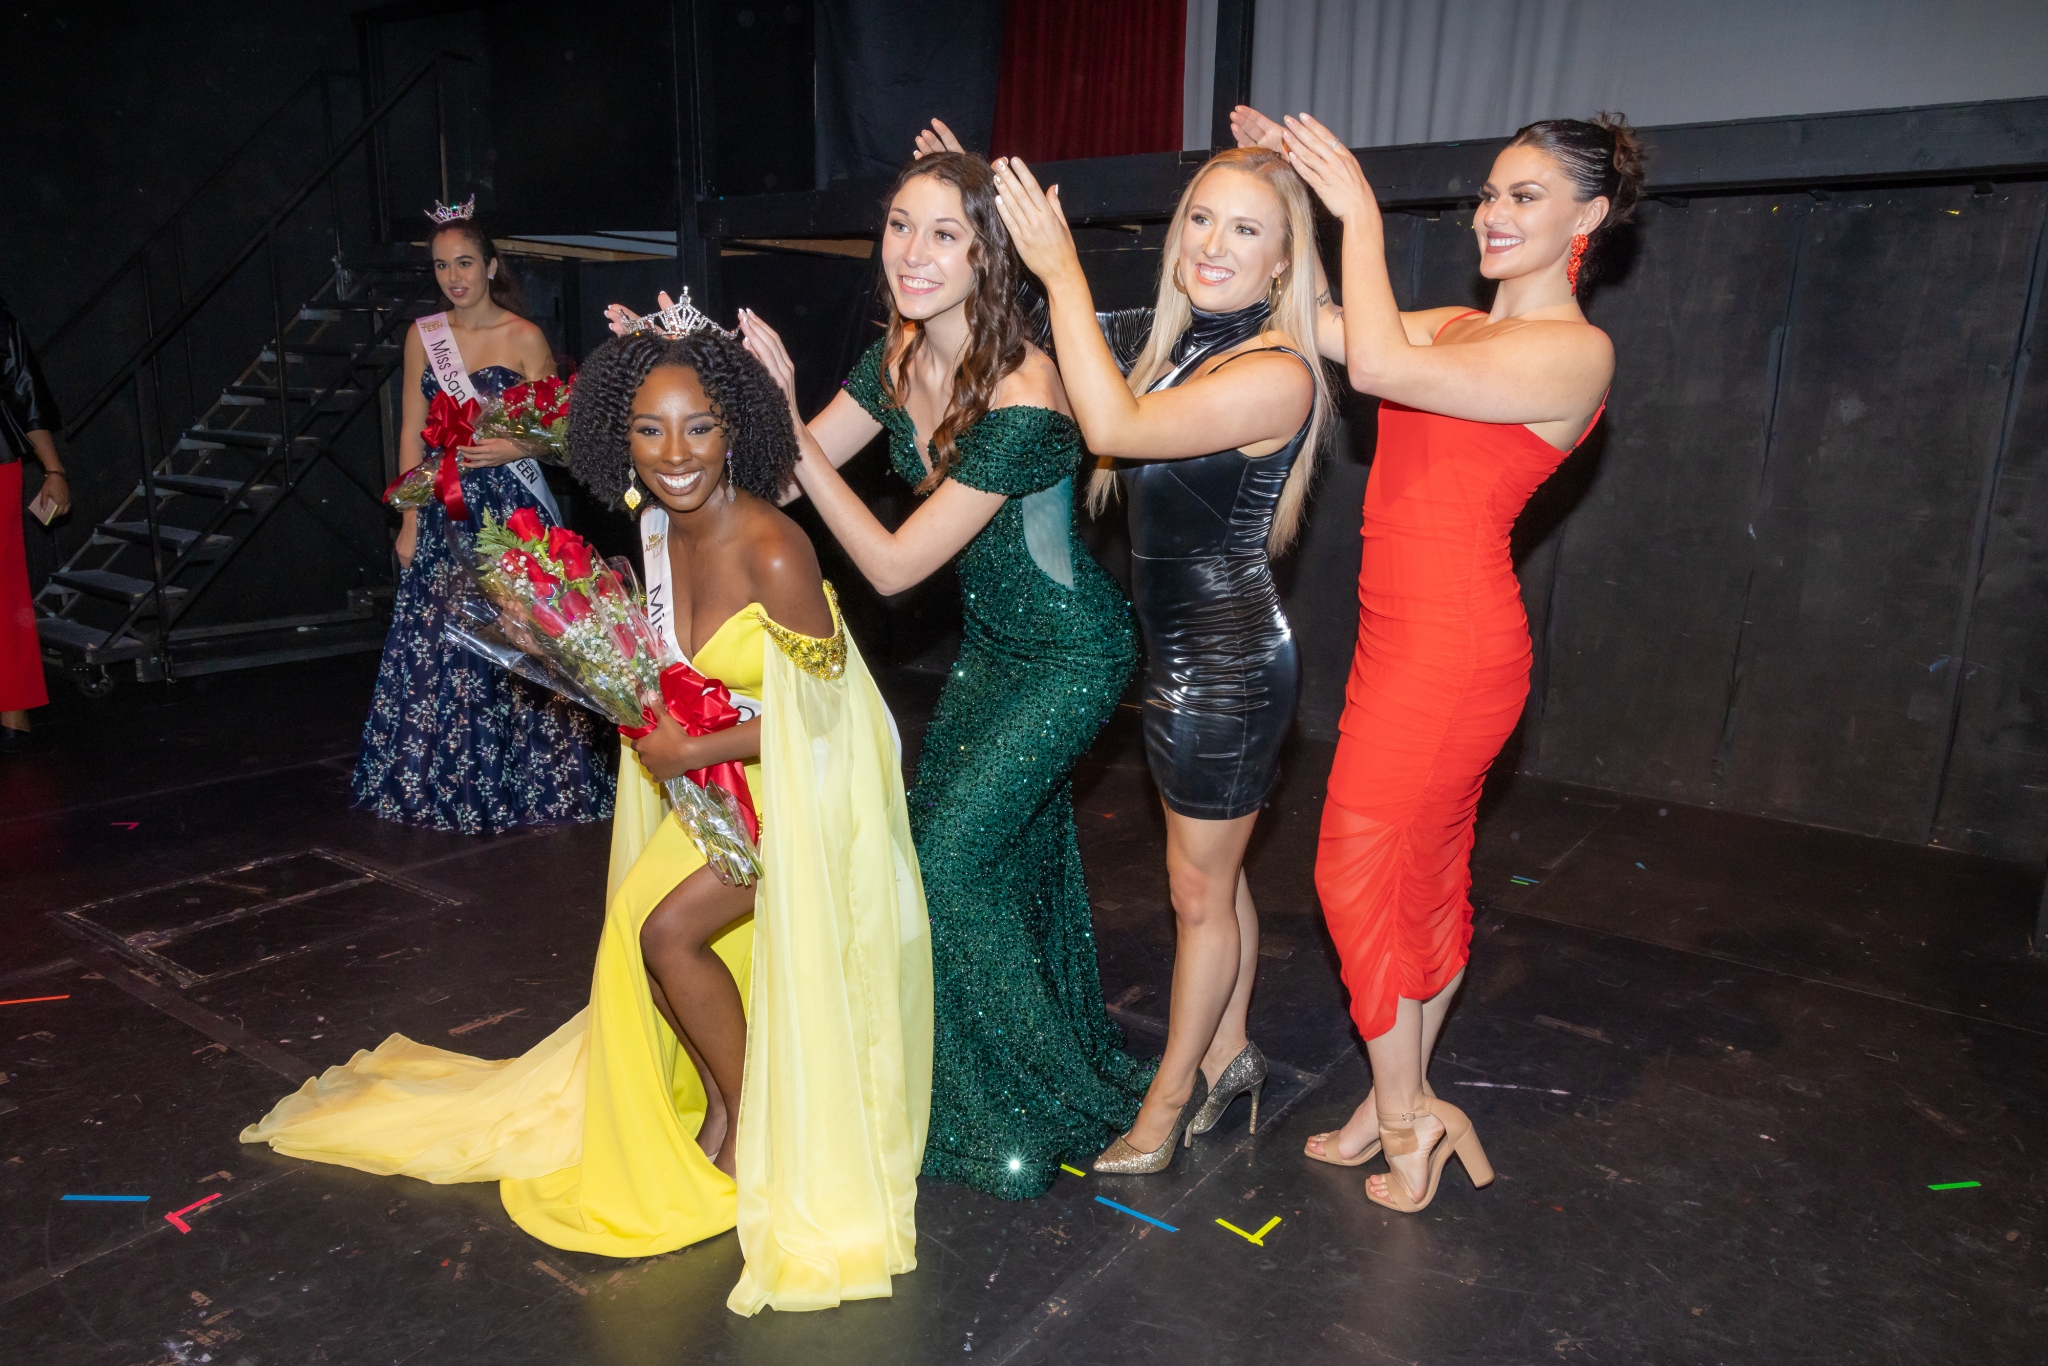 Miss San Diego – A Miss America Local Competition